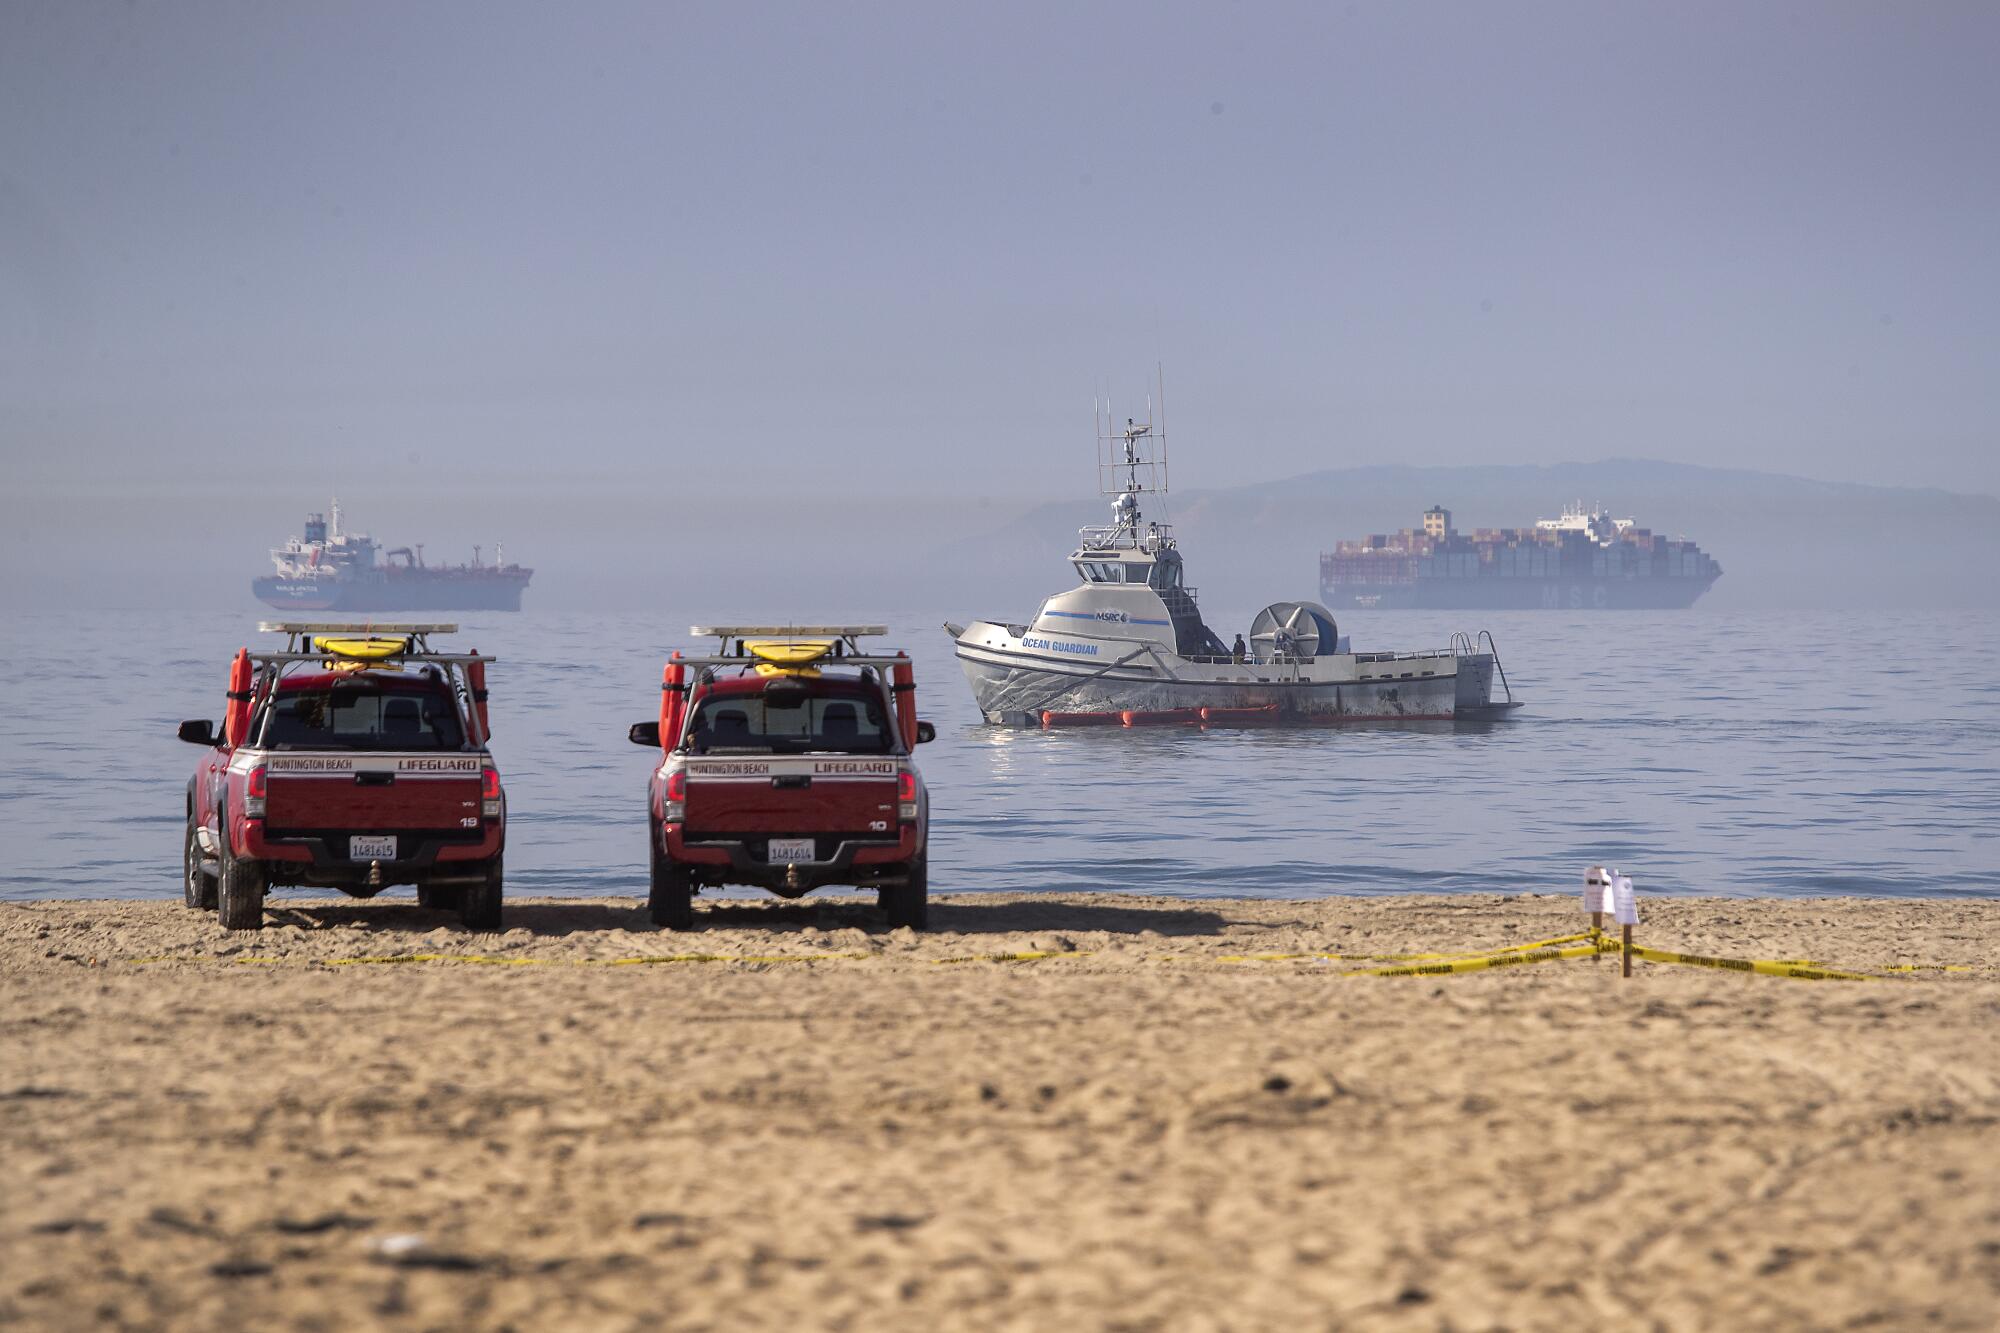 Lifeguard vehicles face the water at Huntington Beach while oil-containing booms are put in place by boats offshore.